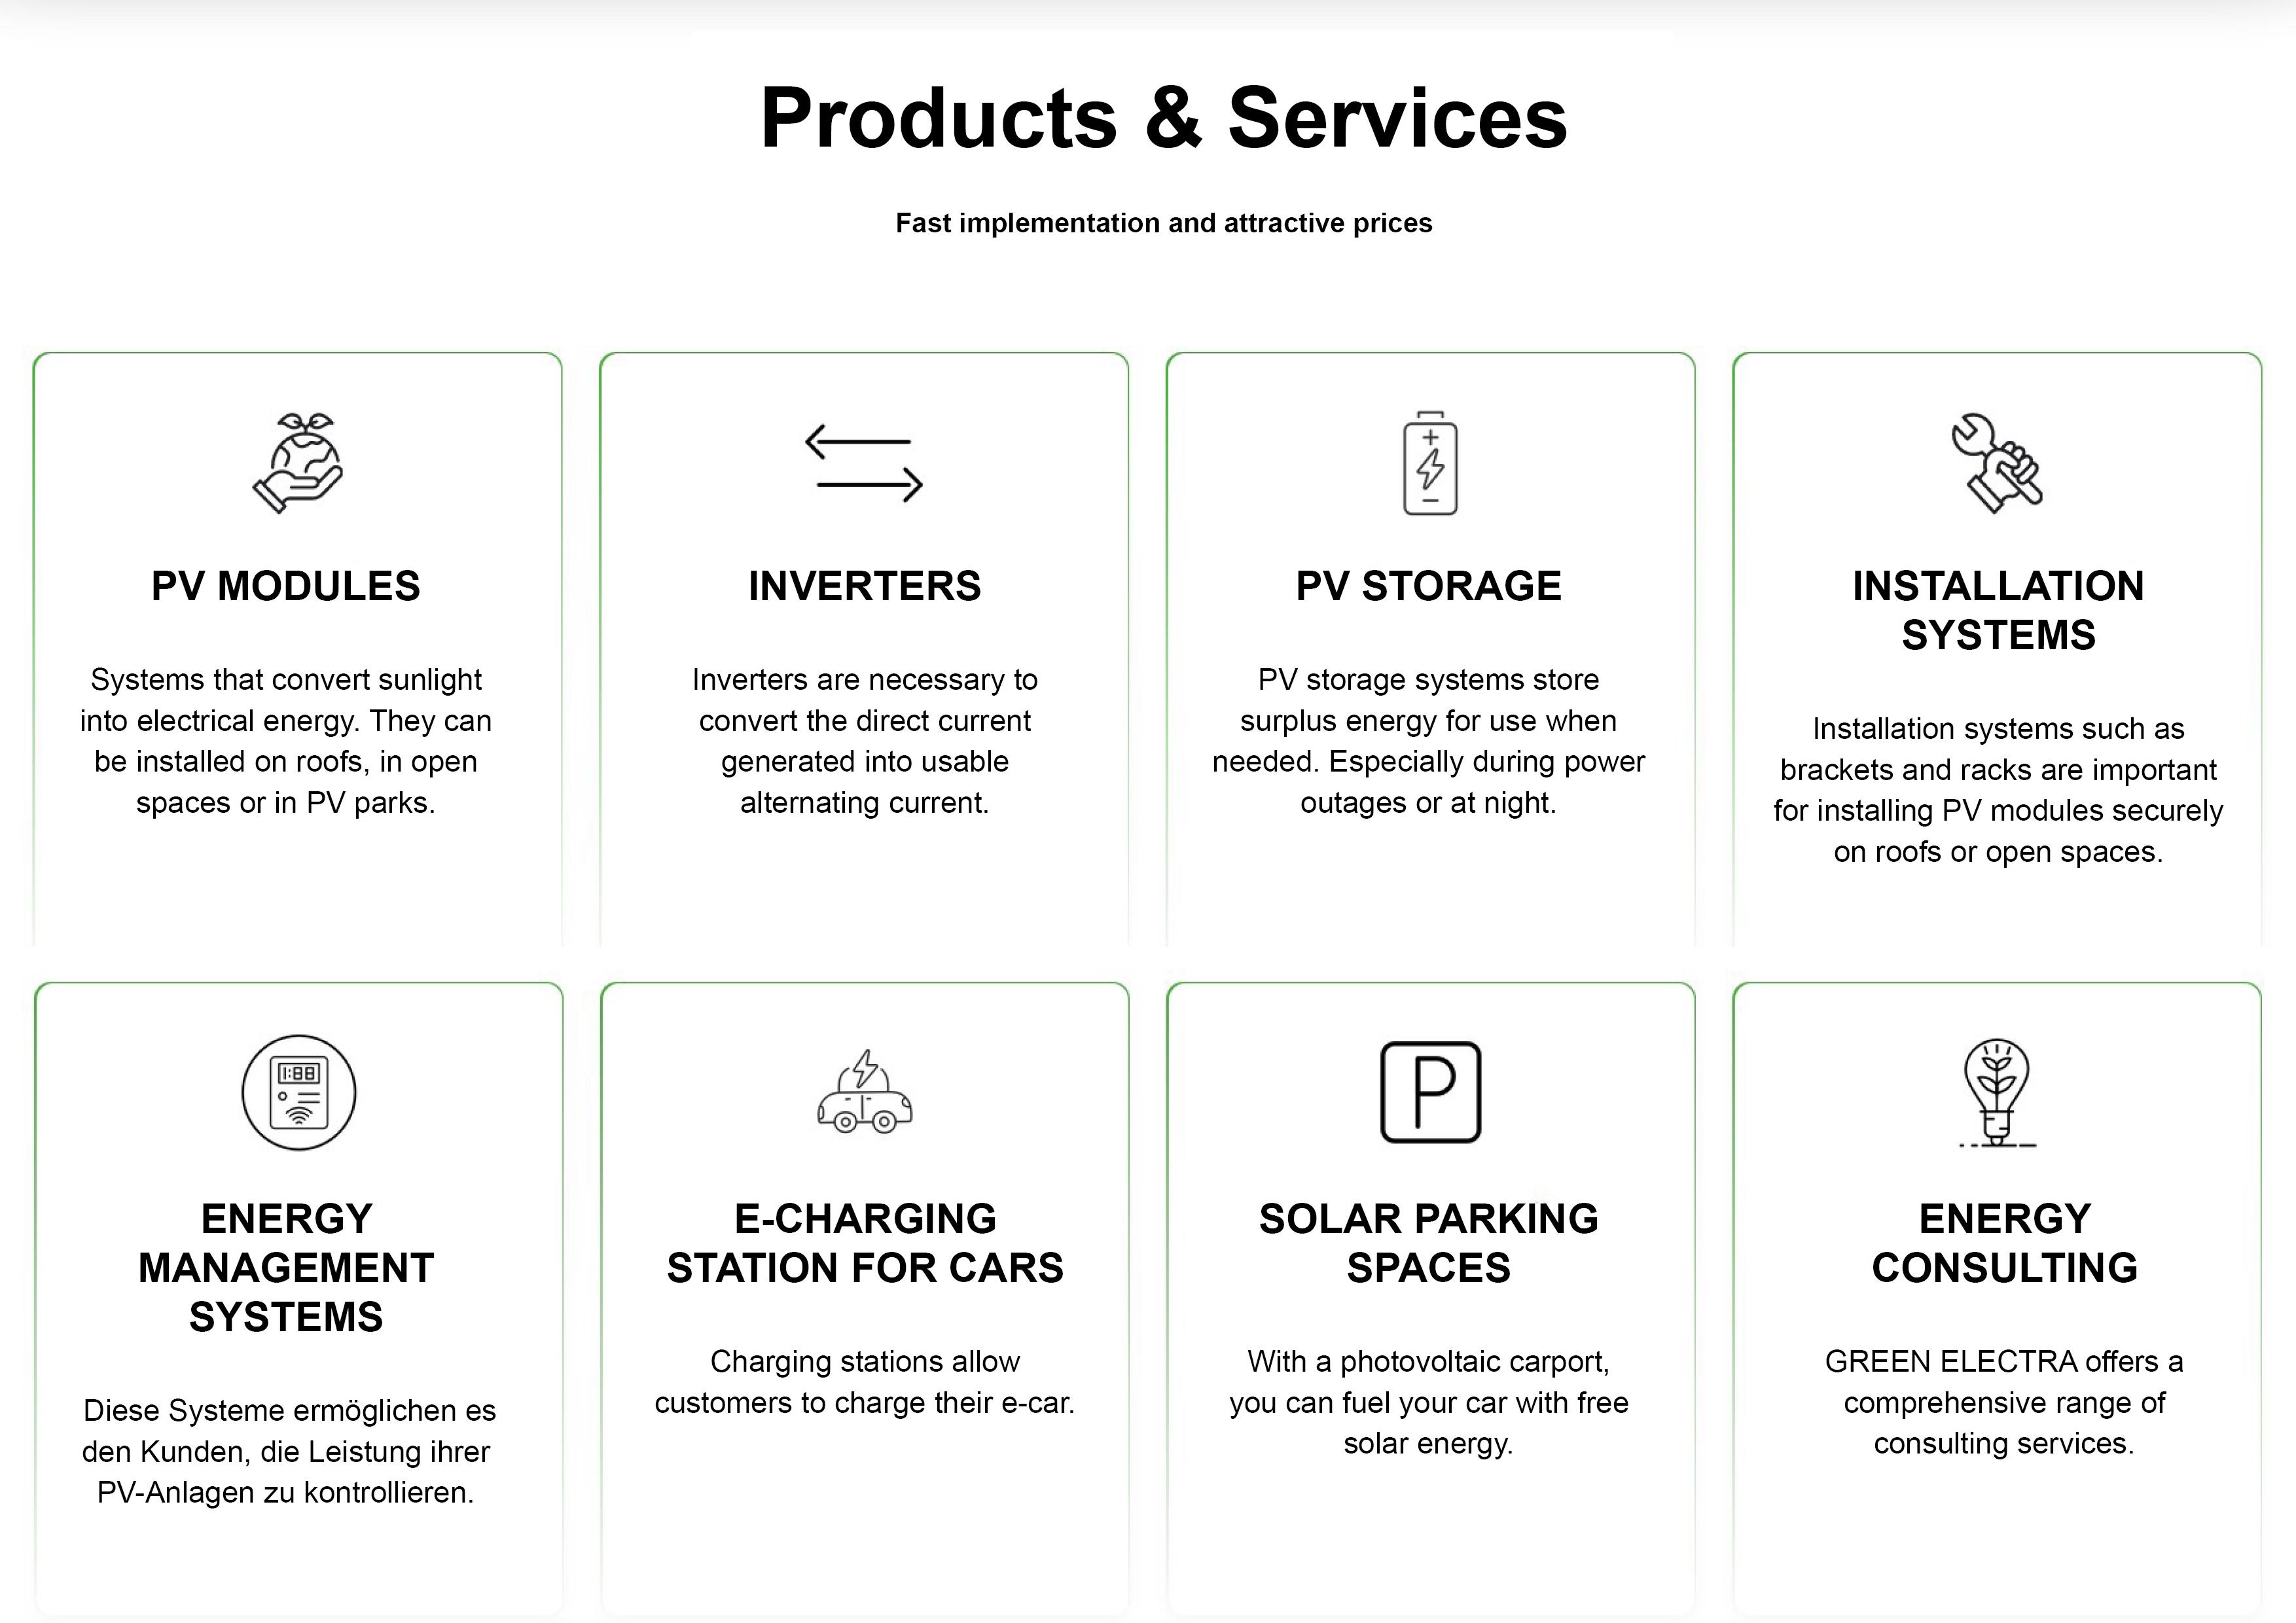 Products and Services offered by GREEN ELECTRA